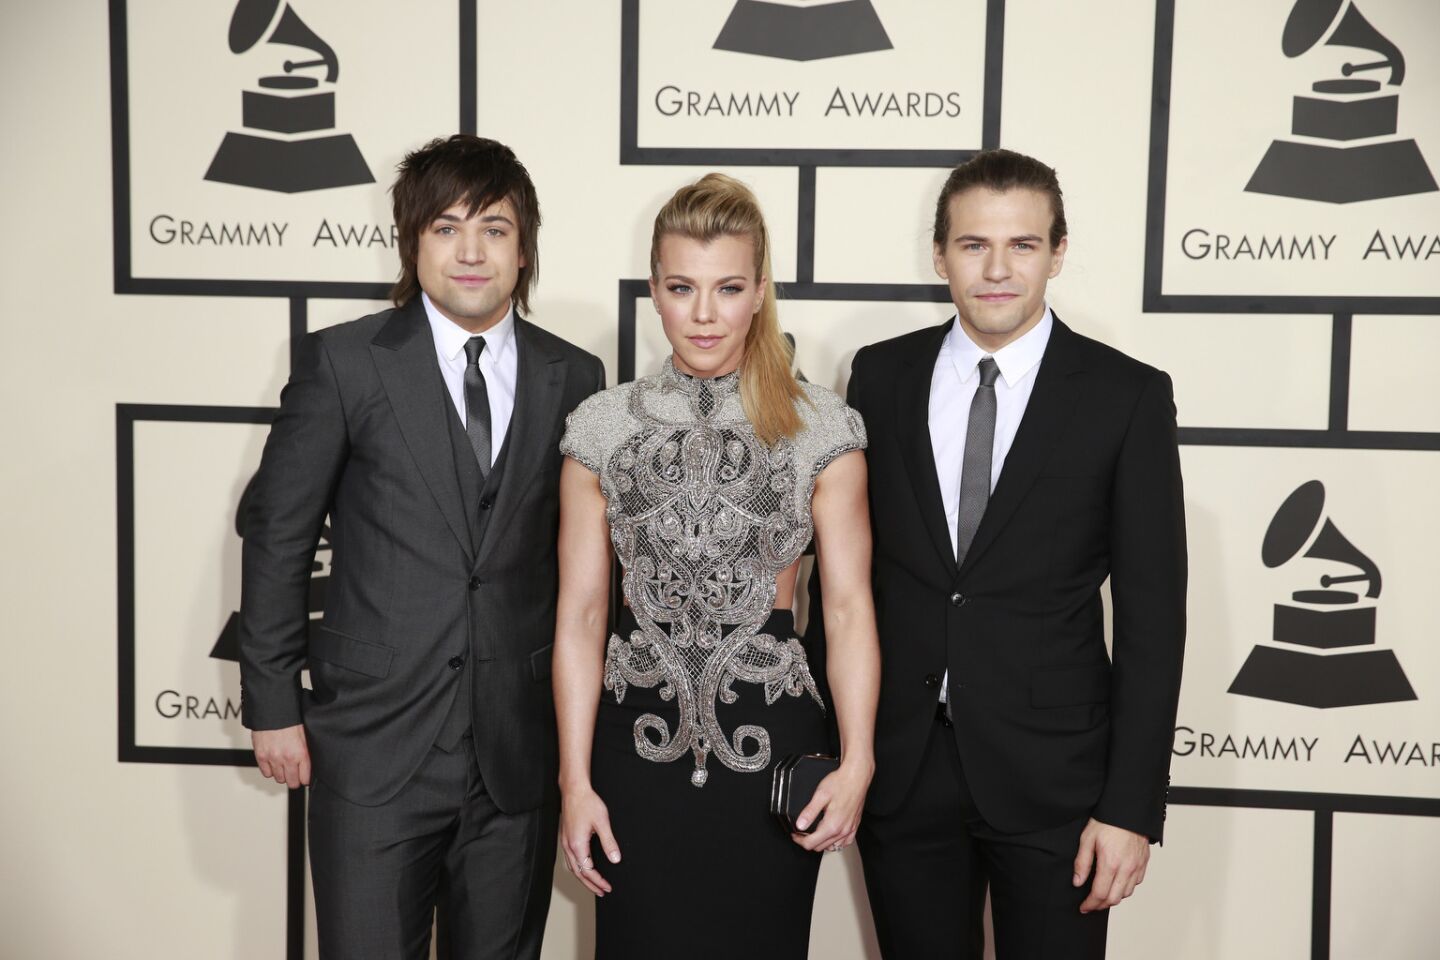 Kimberly Perry and The Band Perry during the arrivals at the 57th Grammy Awards at Staples Center in Los Angeles.